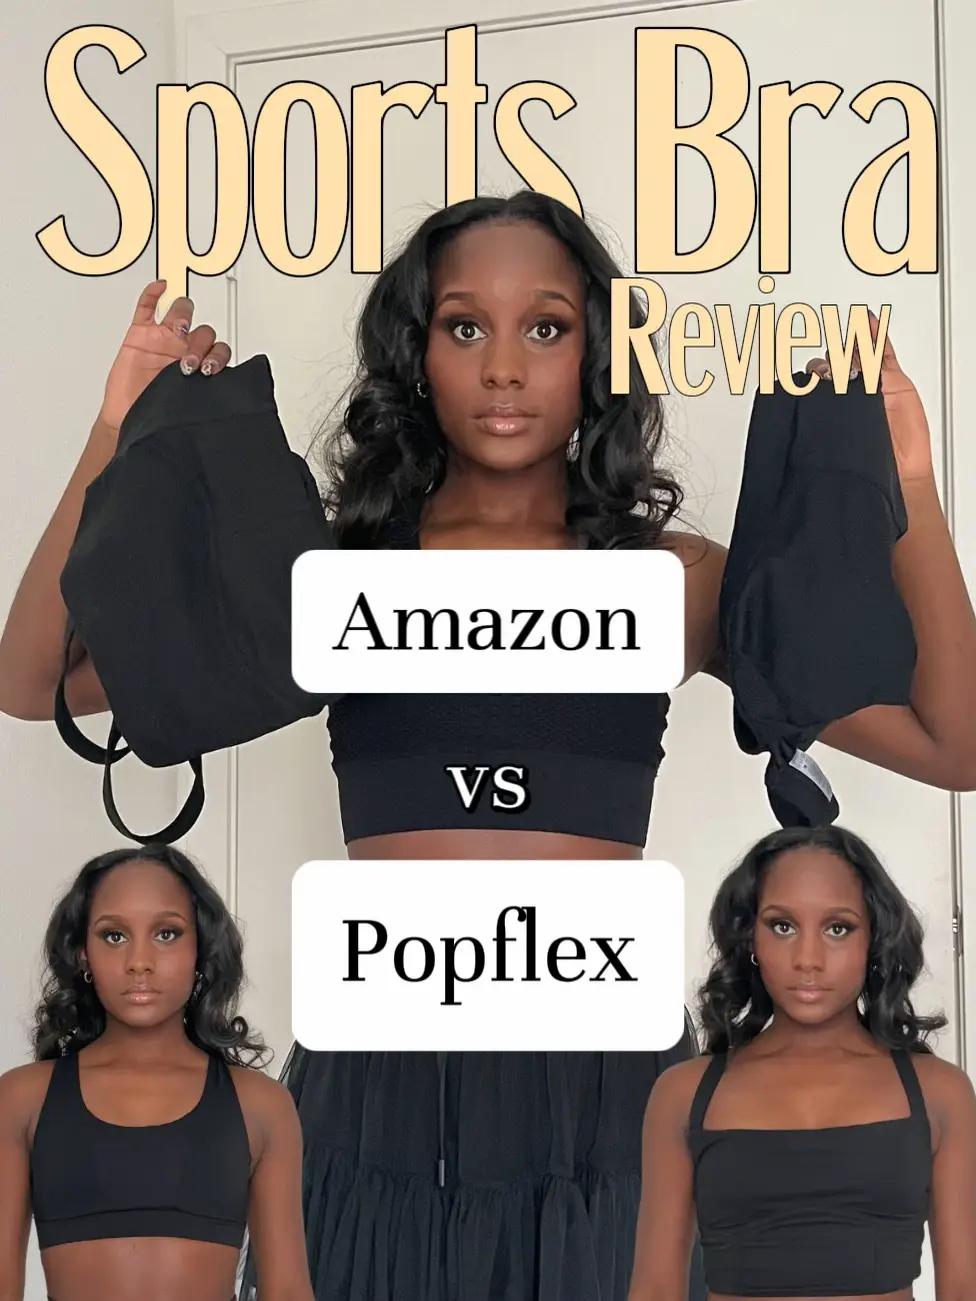 ULTIMATE POPFLEX TRY ON REVIEW SUPERSCULPT TWIRL SKORT WITH POCKETS HAUL  DESIGNED BY BLOGILATES 